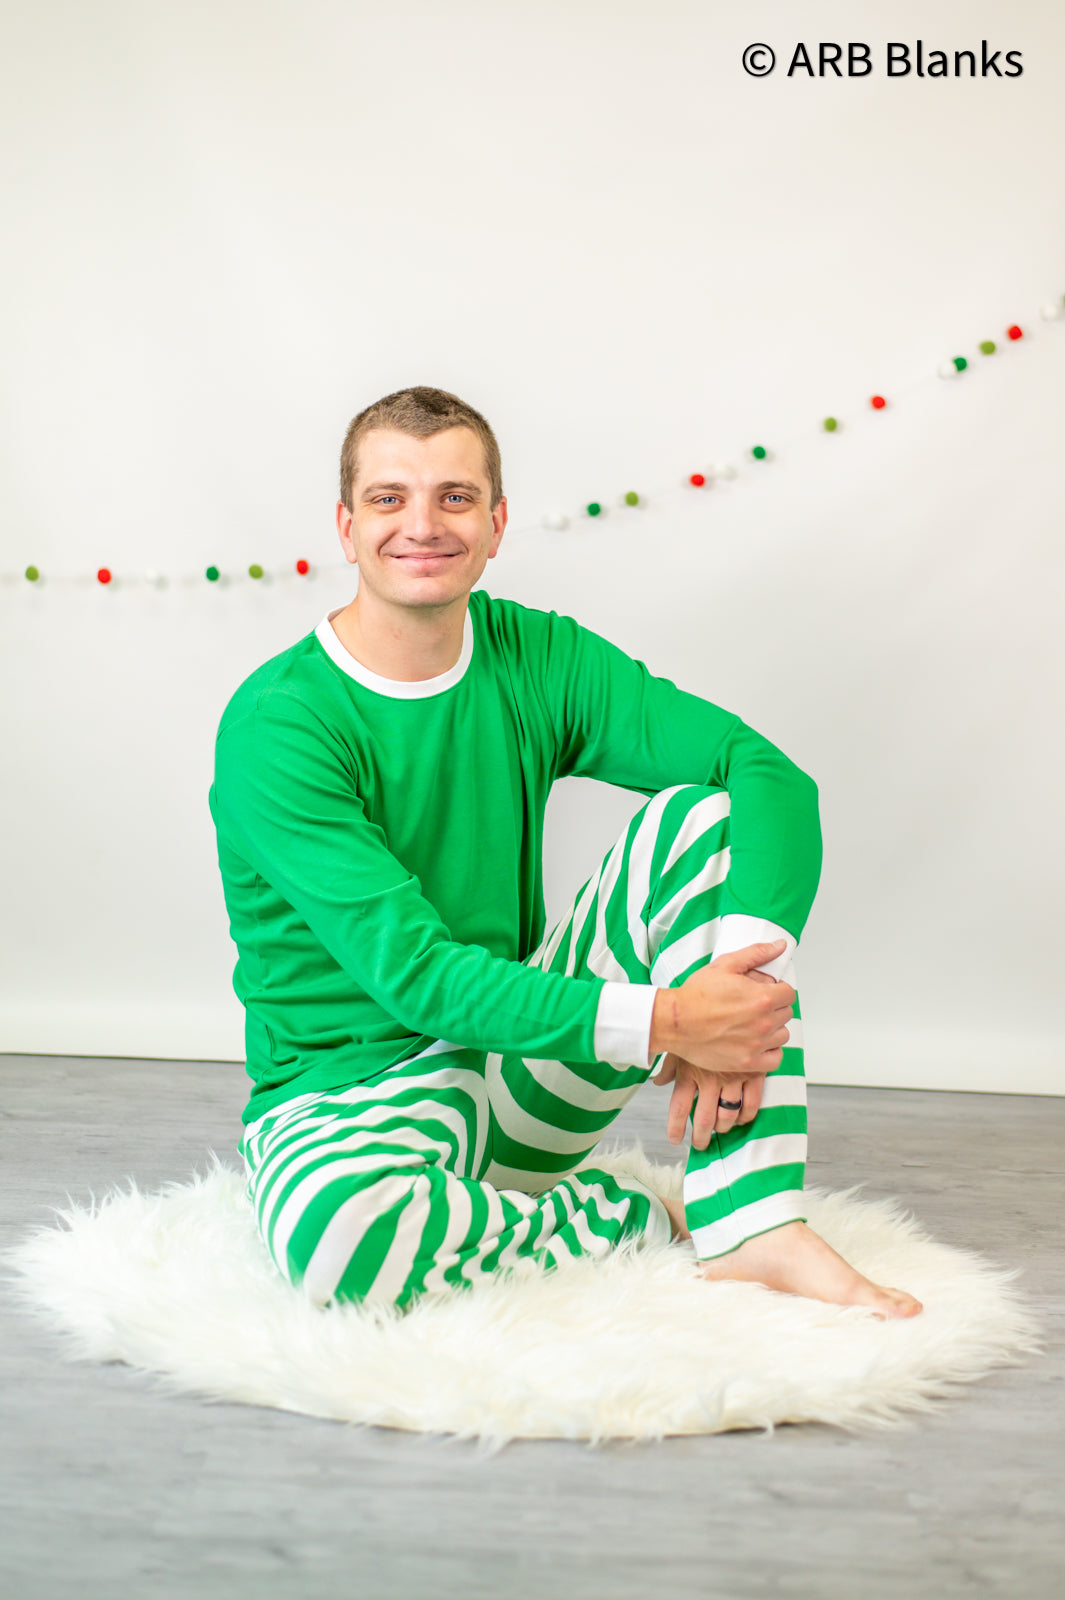 CHRISTMAS: Green and White Striped Collection